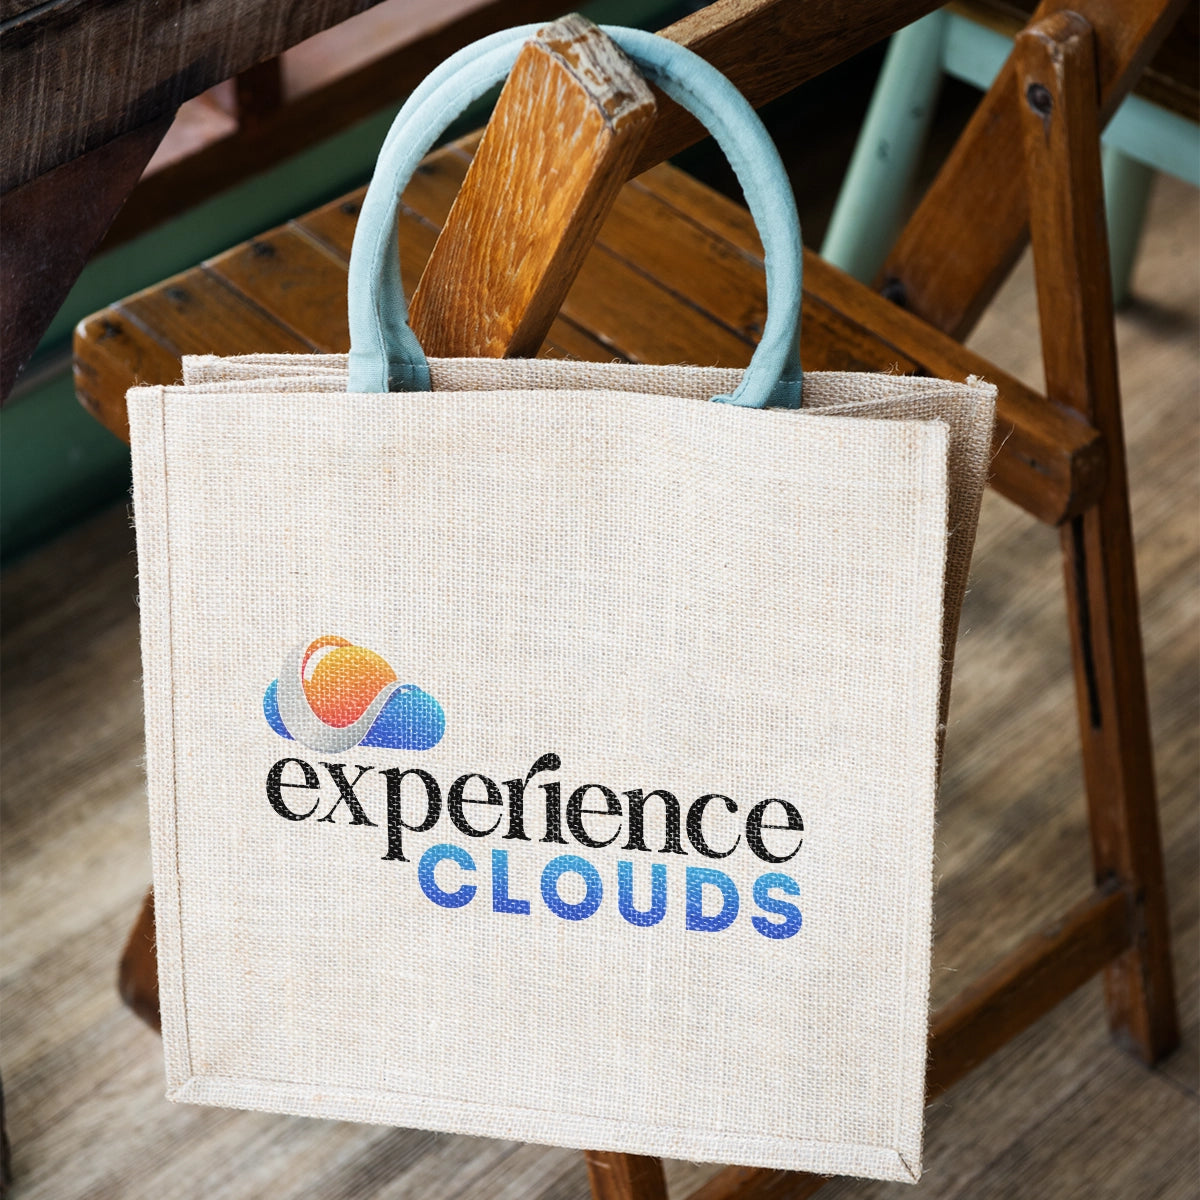 experienceclouds.com